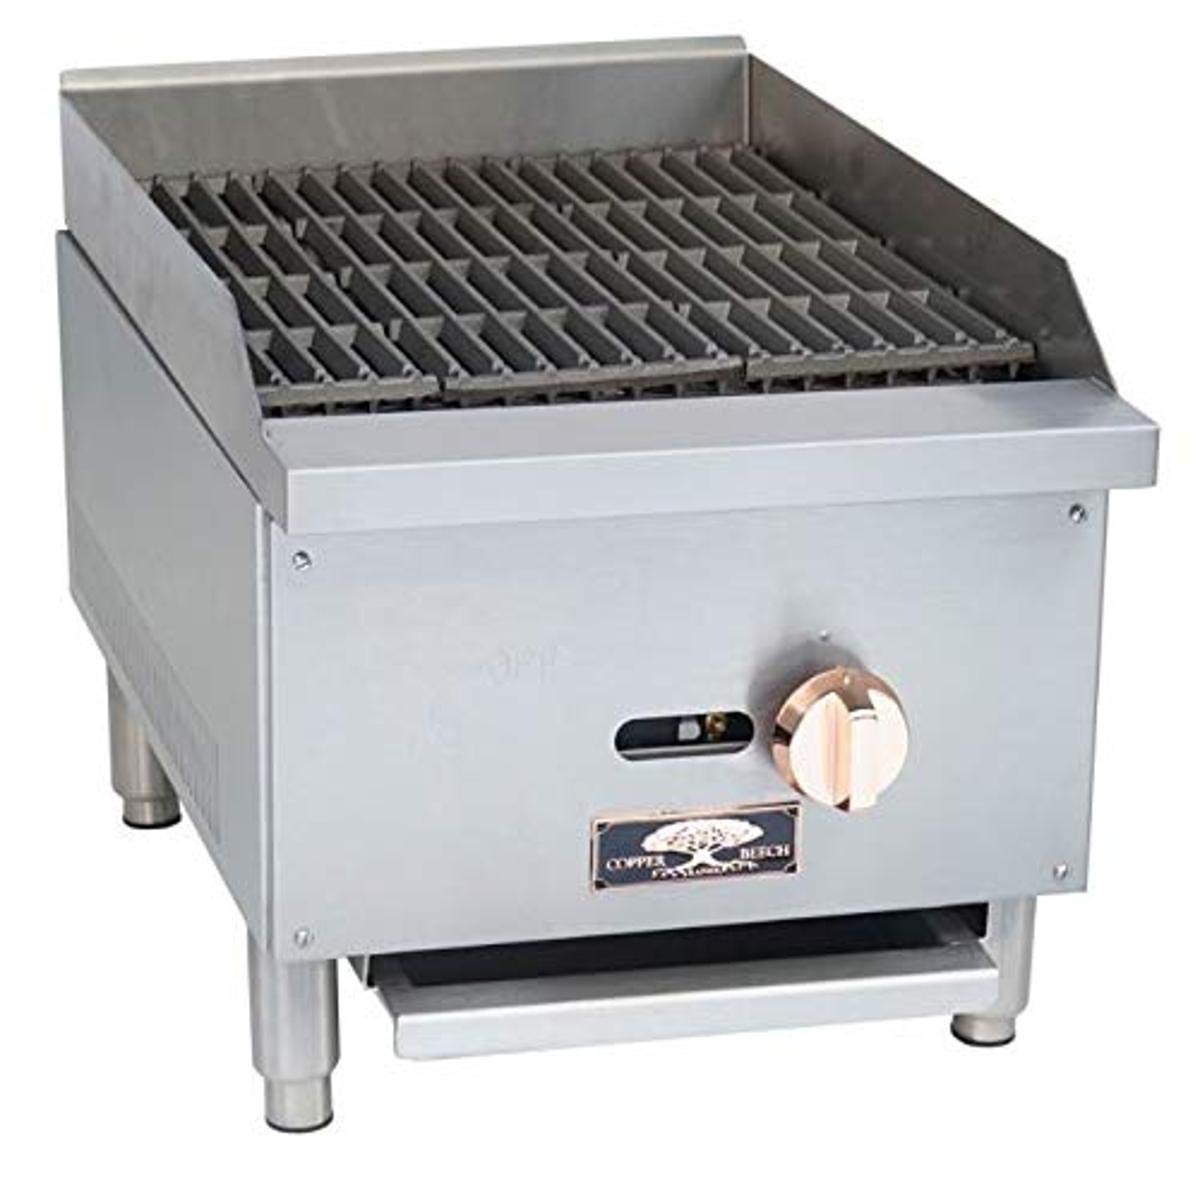 Copper Beech CBRB-16 16" Wide Gas Radiant Broiler